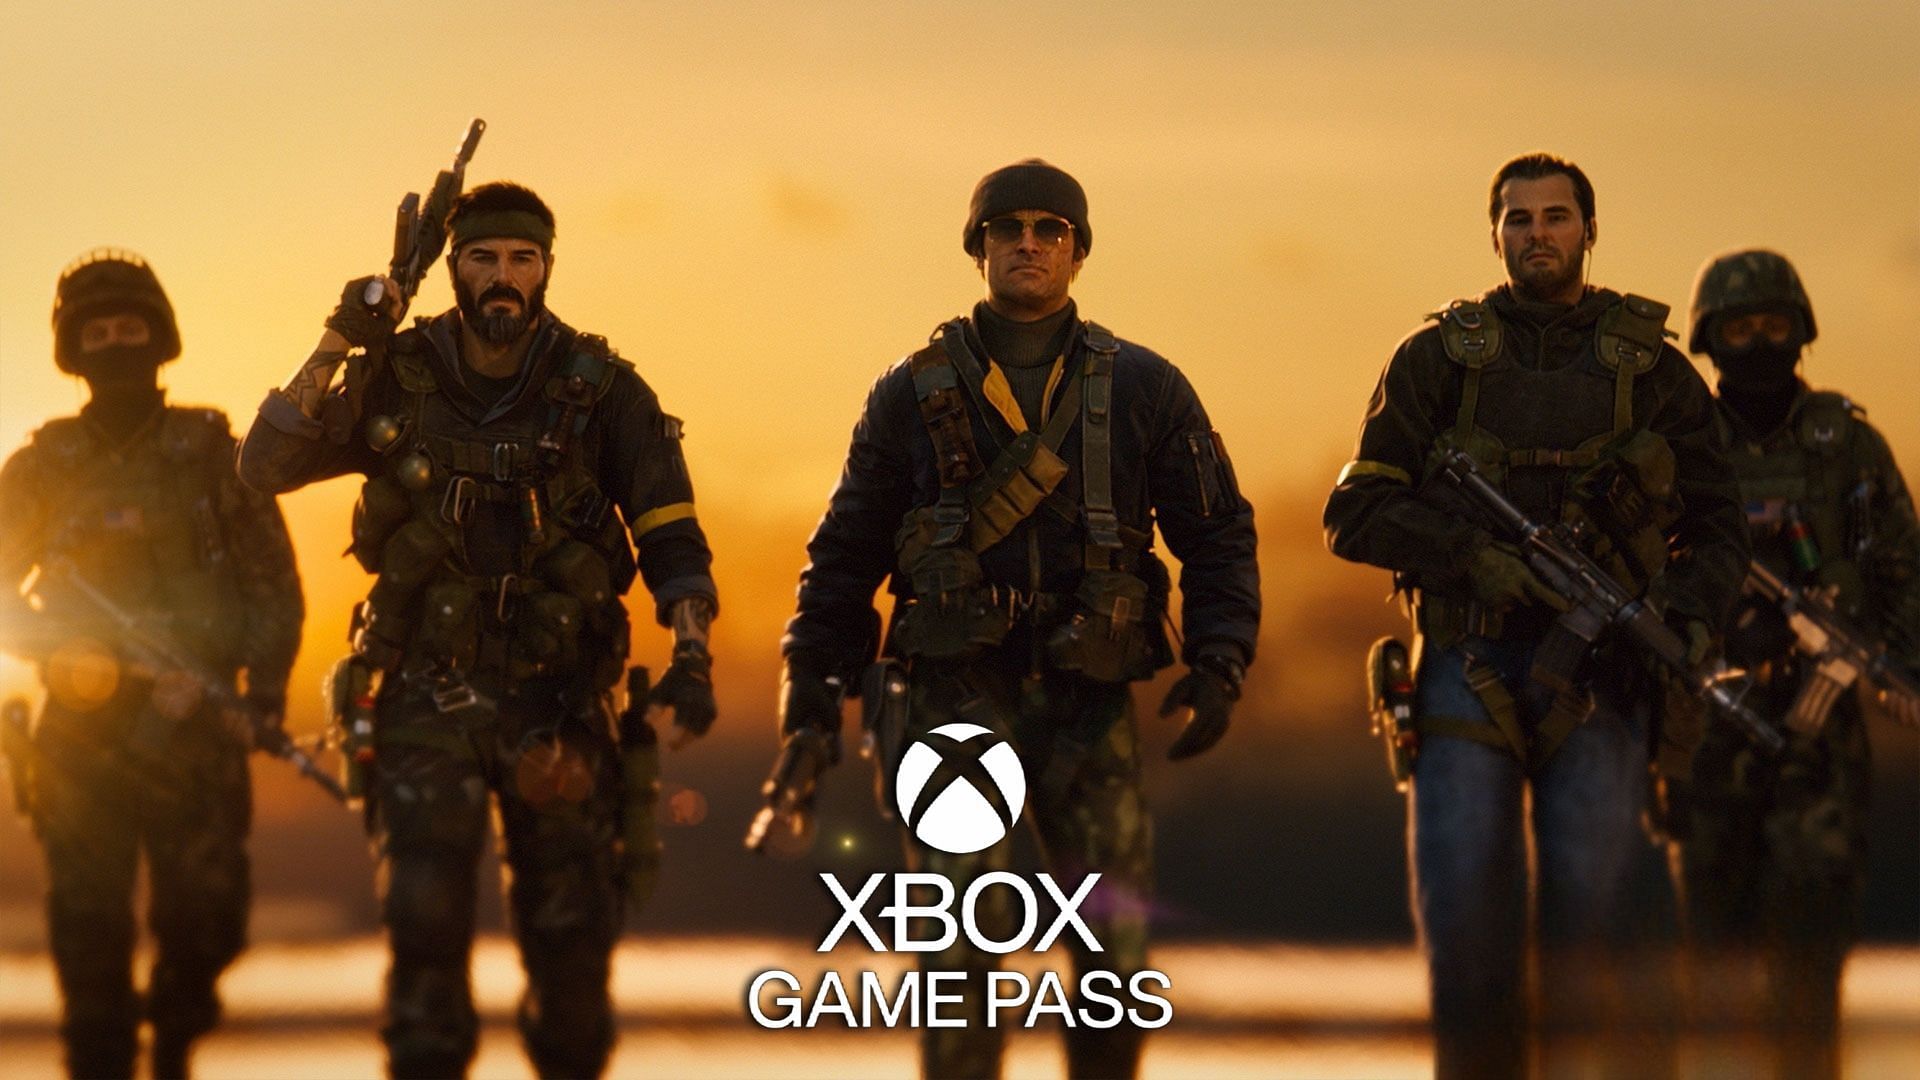 From the left, Frank Woods, Russell Adler, and Alex Mason in Black Ops with a Xbox Game Pass logo in the middle